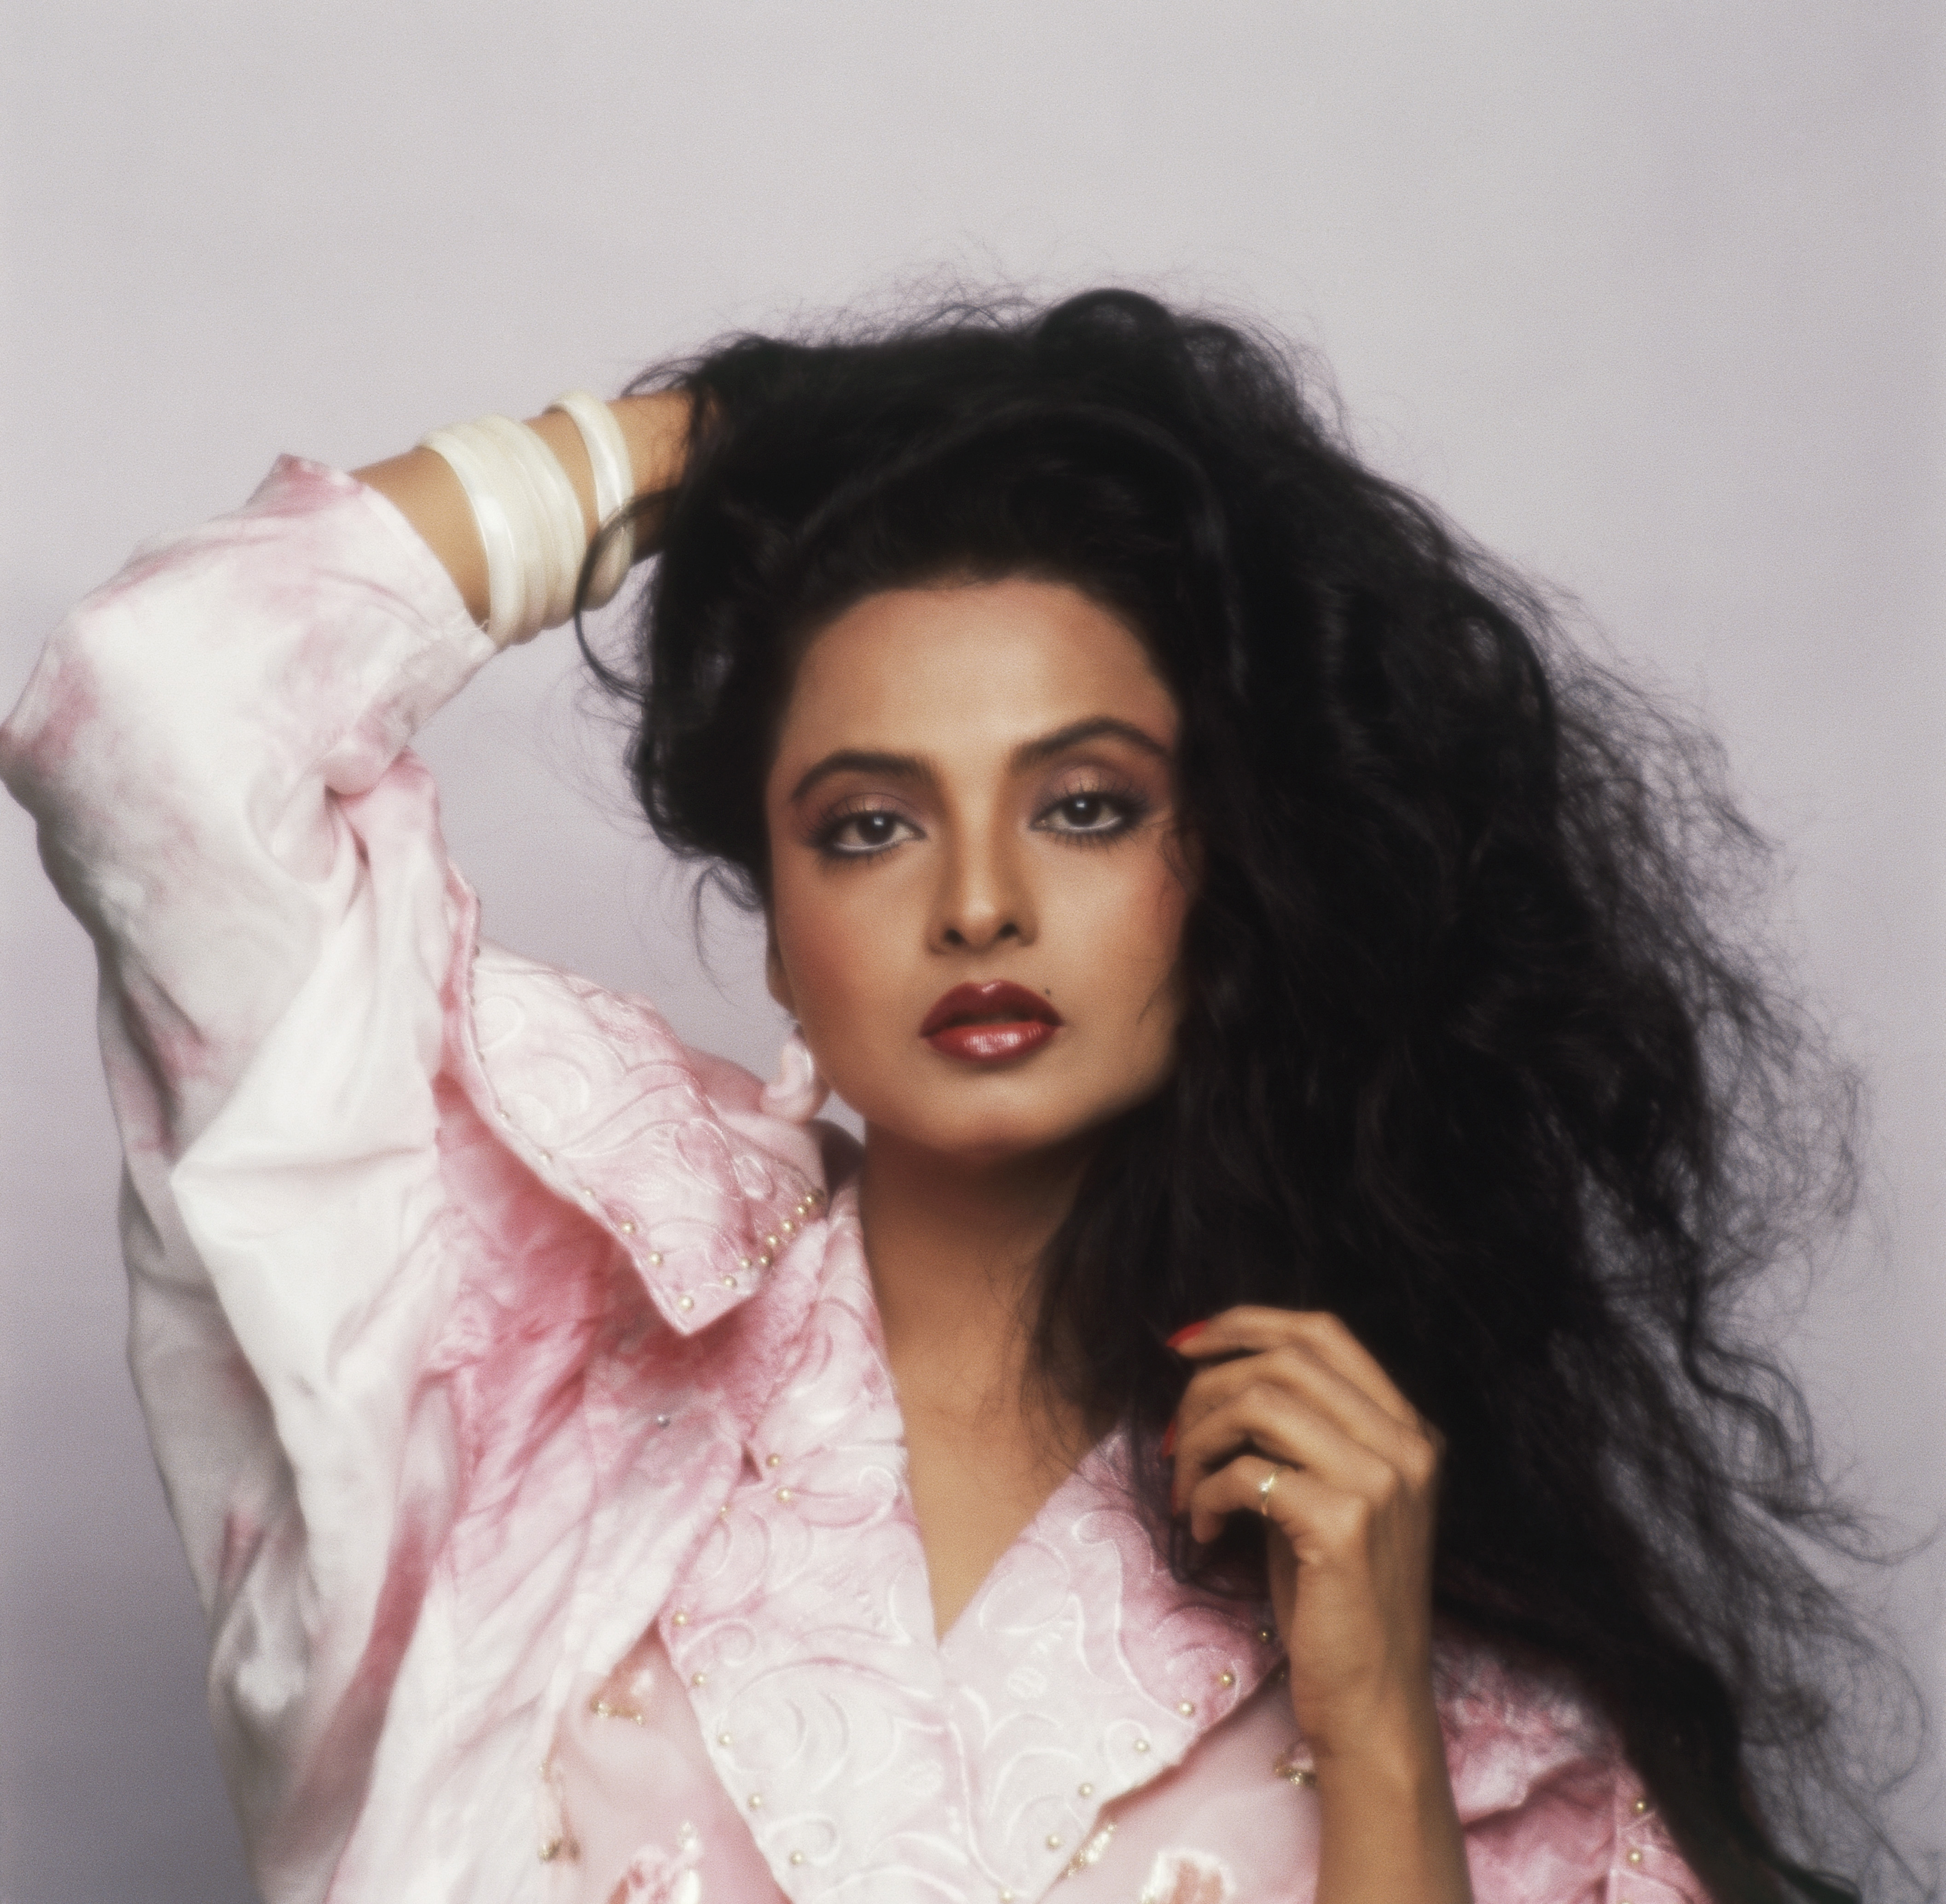 Rekha Heroine Ki Xx Sexy Video - How Rekha persevered 'national vamp' tag after her husband Mukesh Aggarwal  committed suicide & came out strong | PINKVILLA